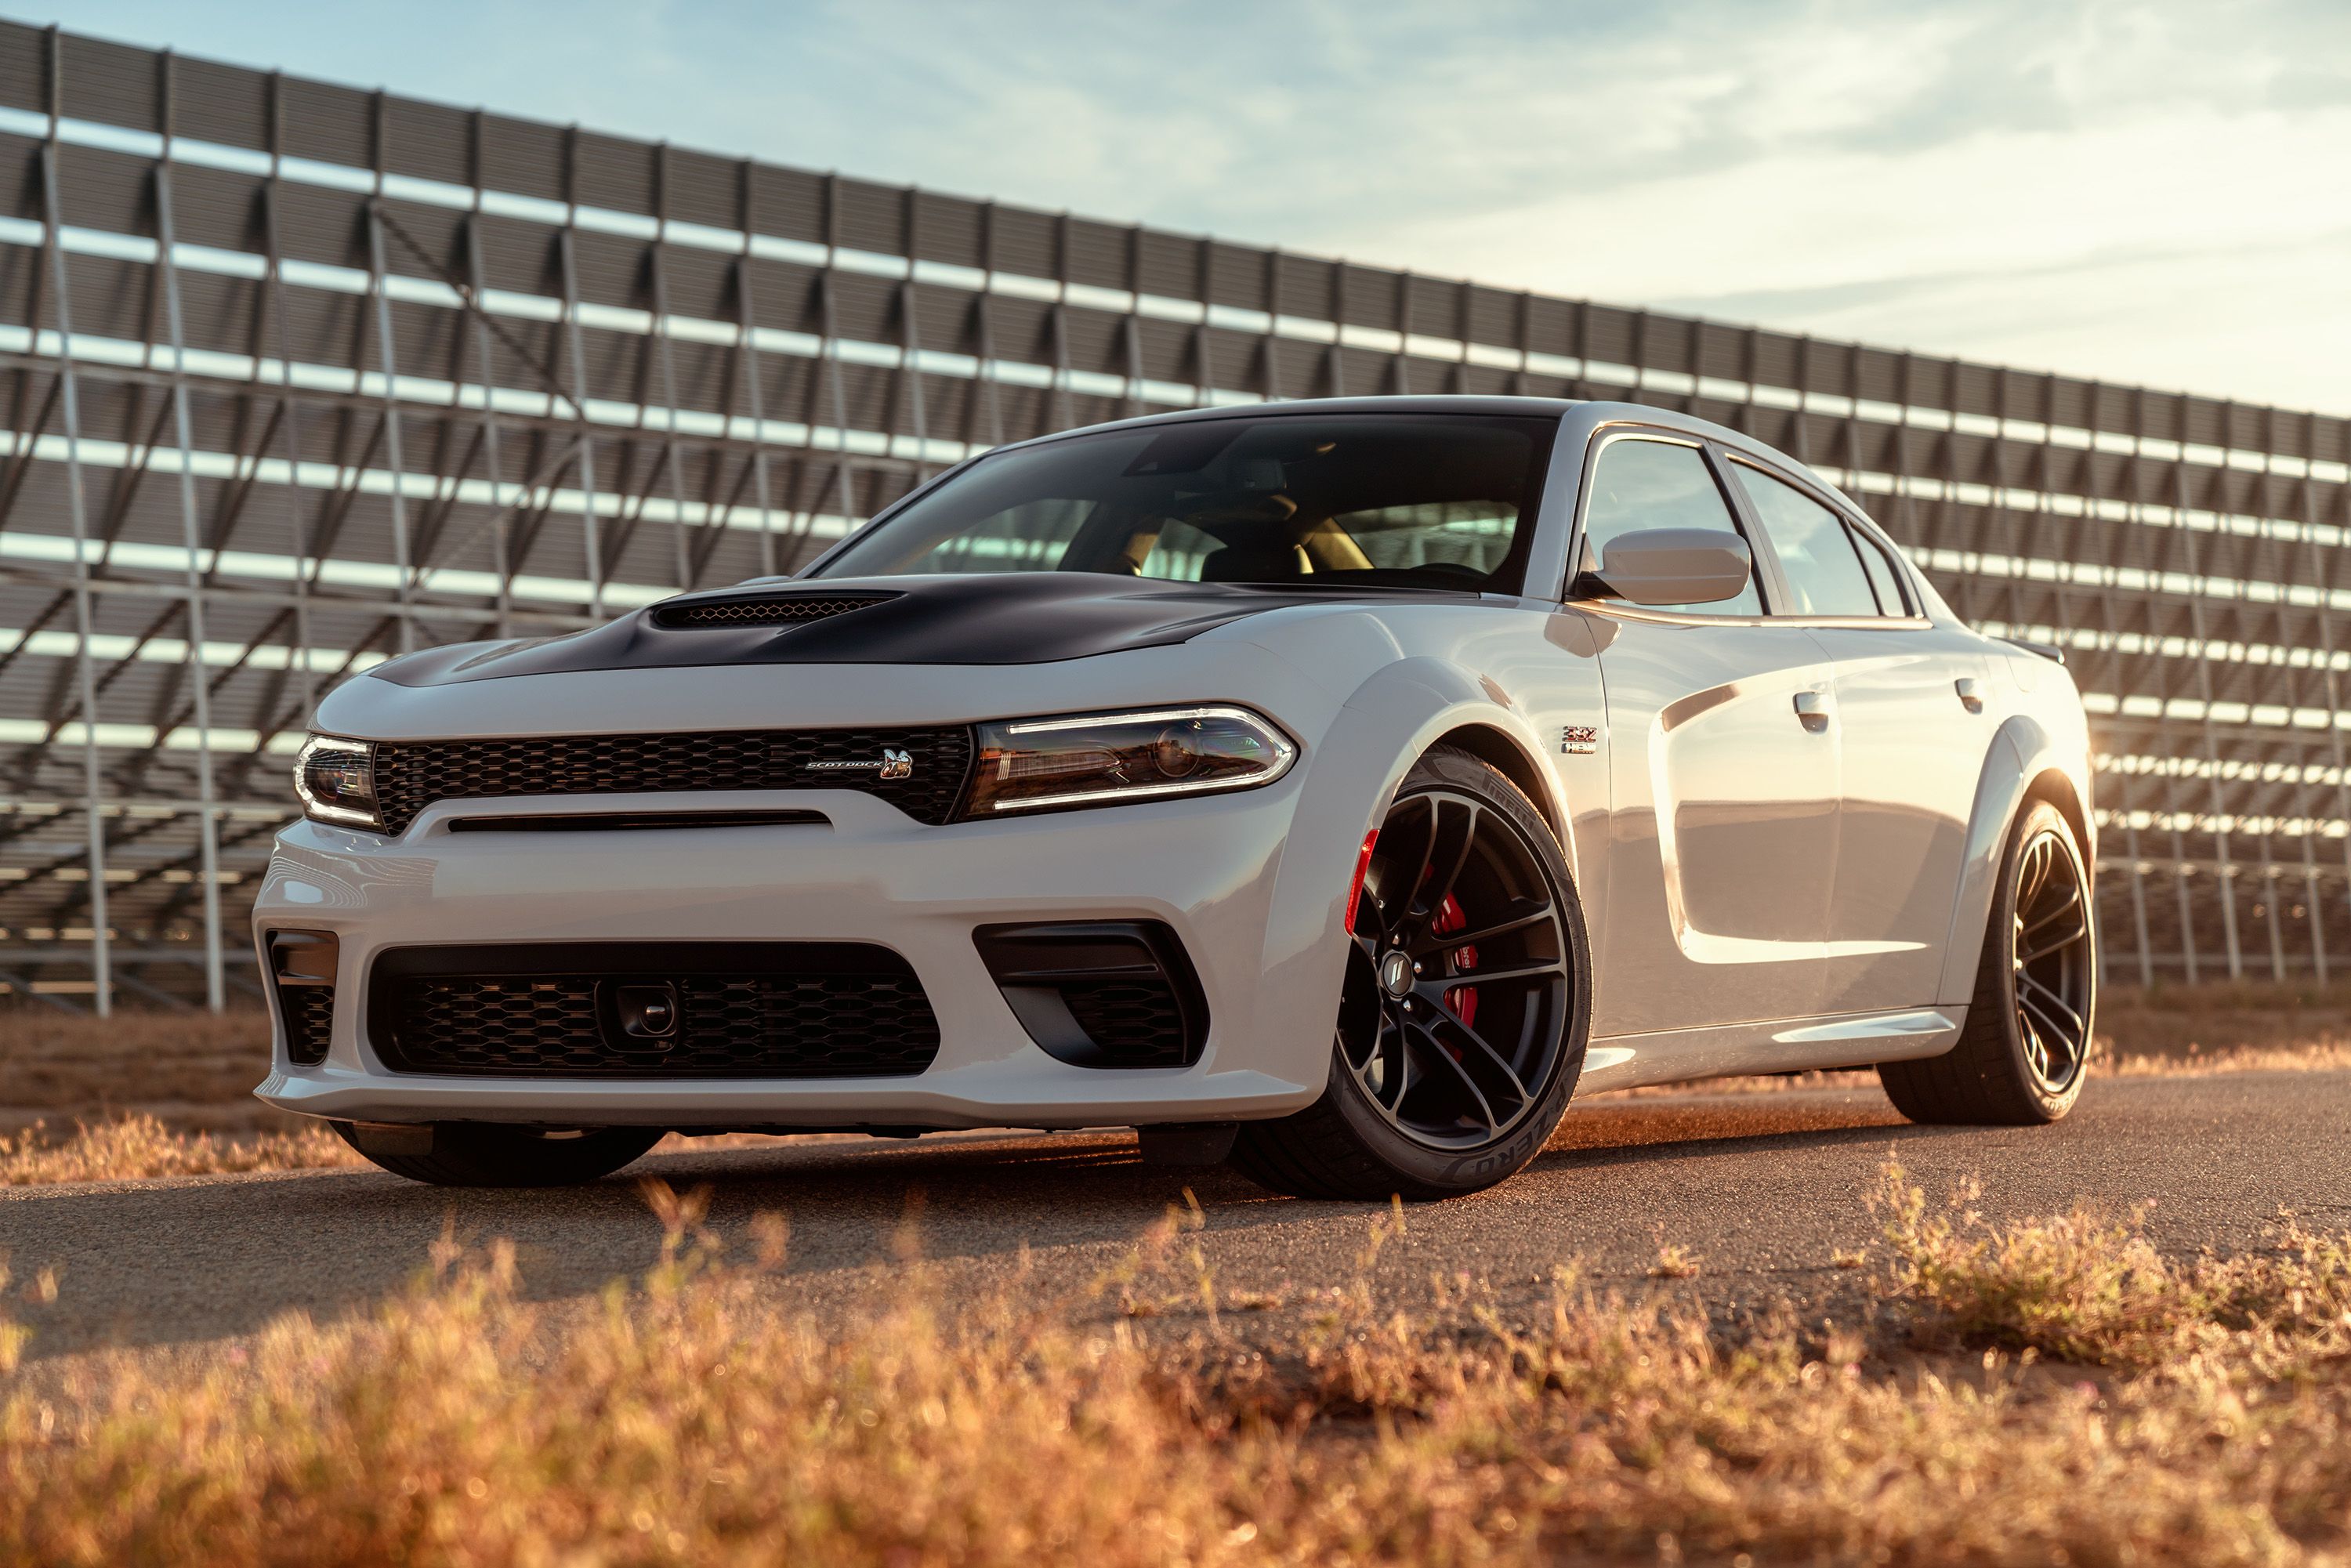 Charger Scat Pack Ideas That Will Work in 2022